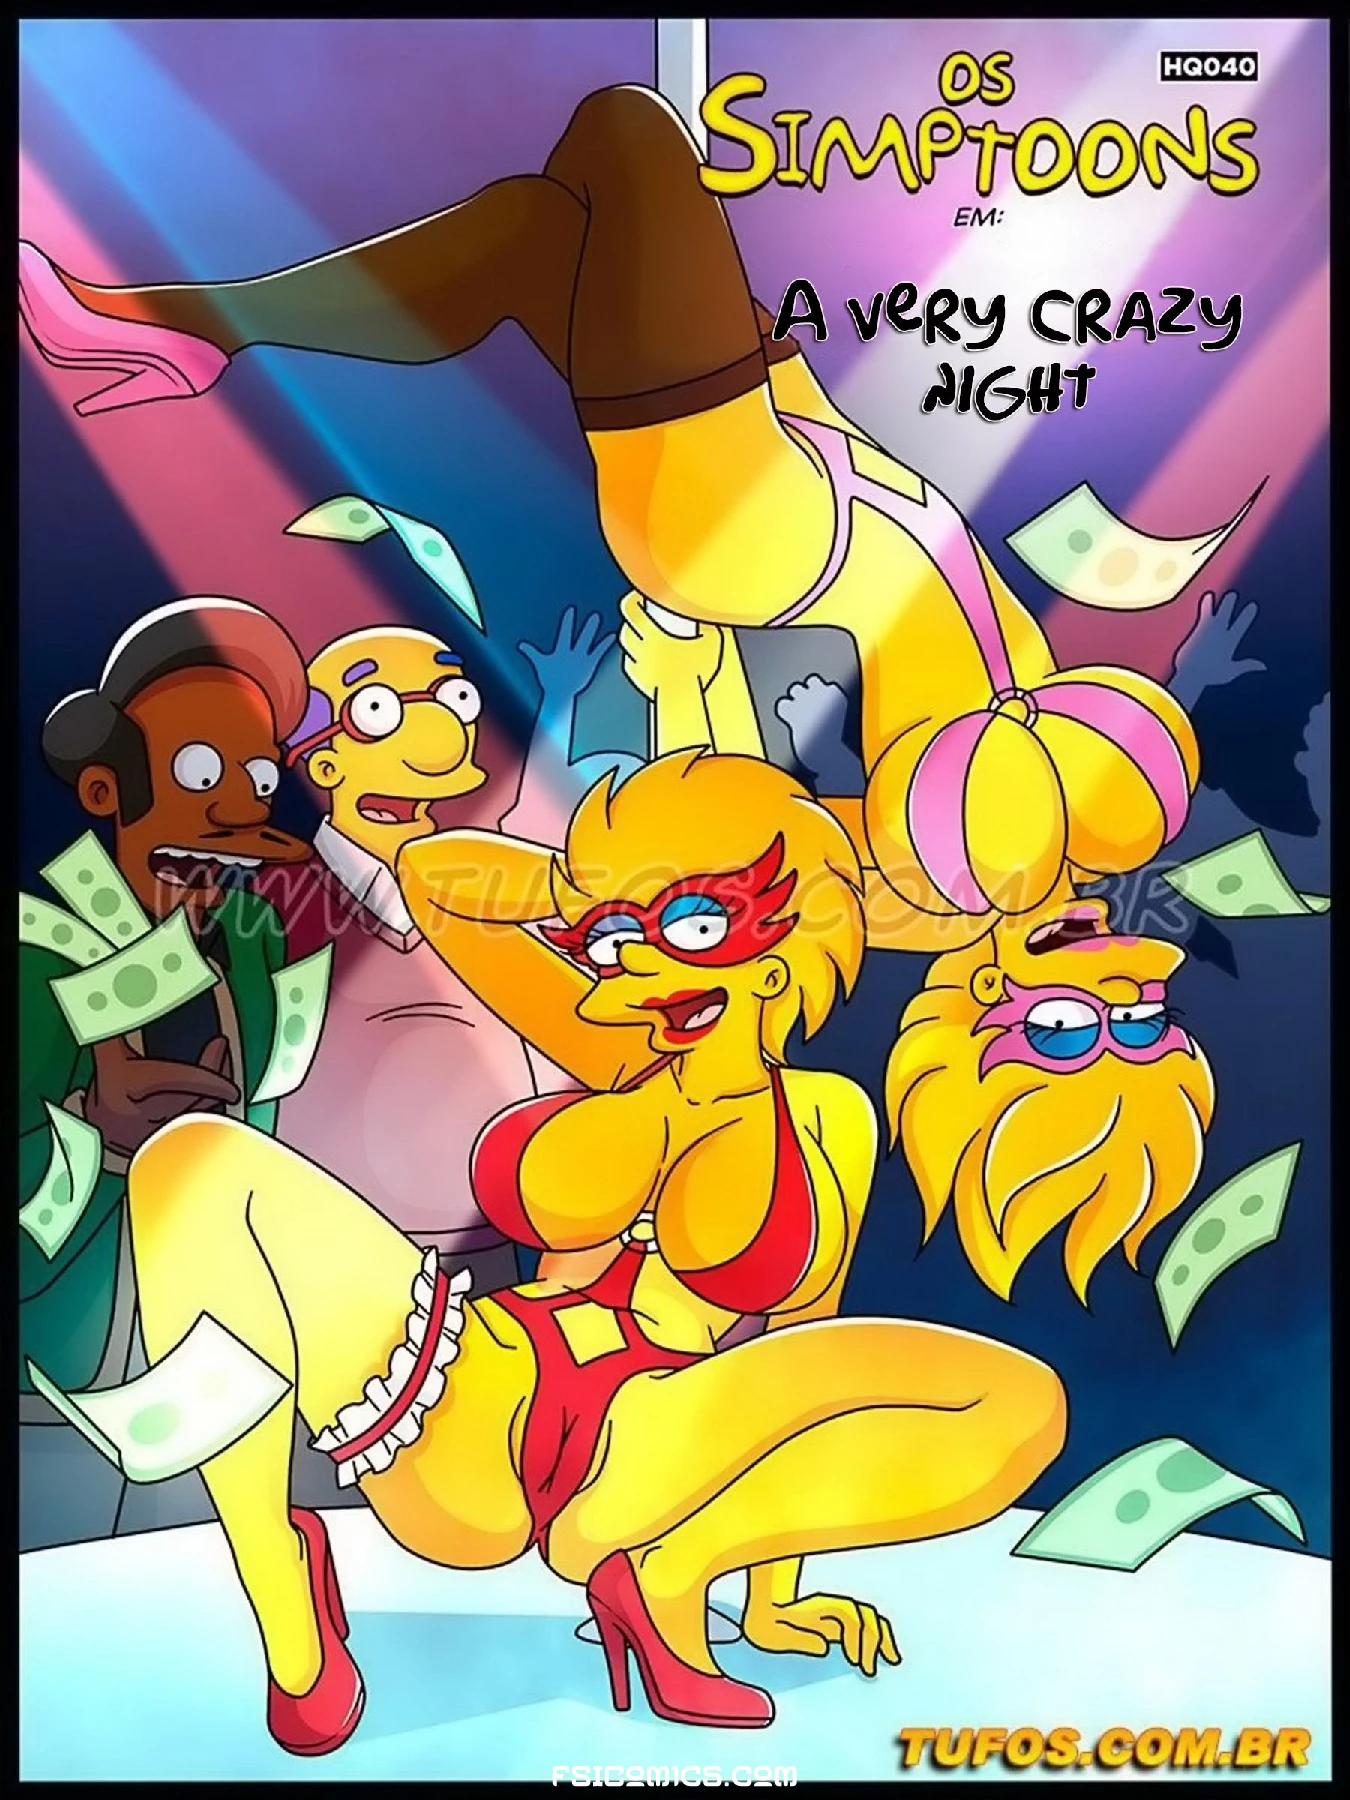 The Simpsons Chapter 40 – A Very Crazy Night – WC TF - 35 - FSIComics